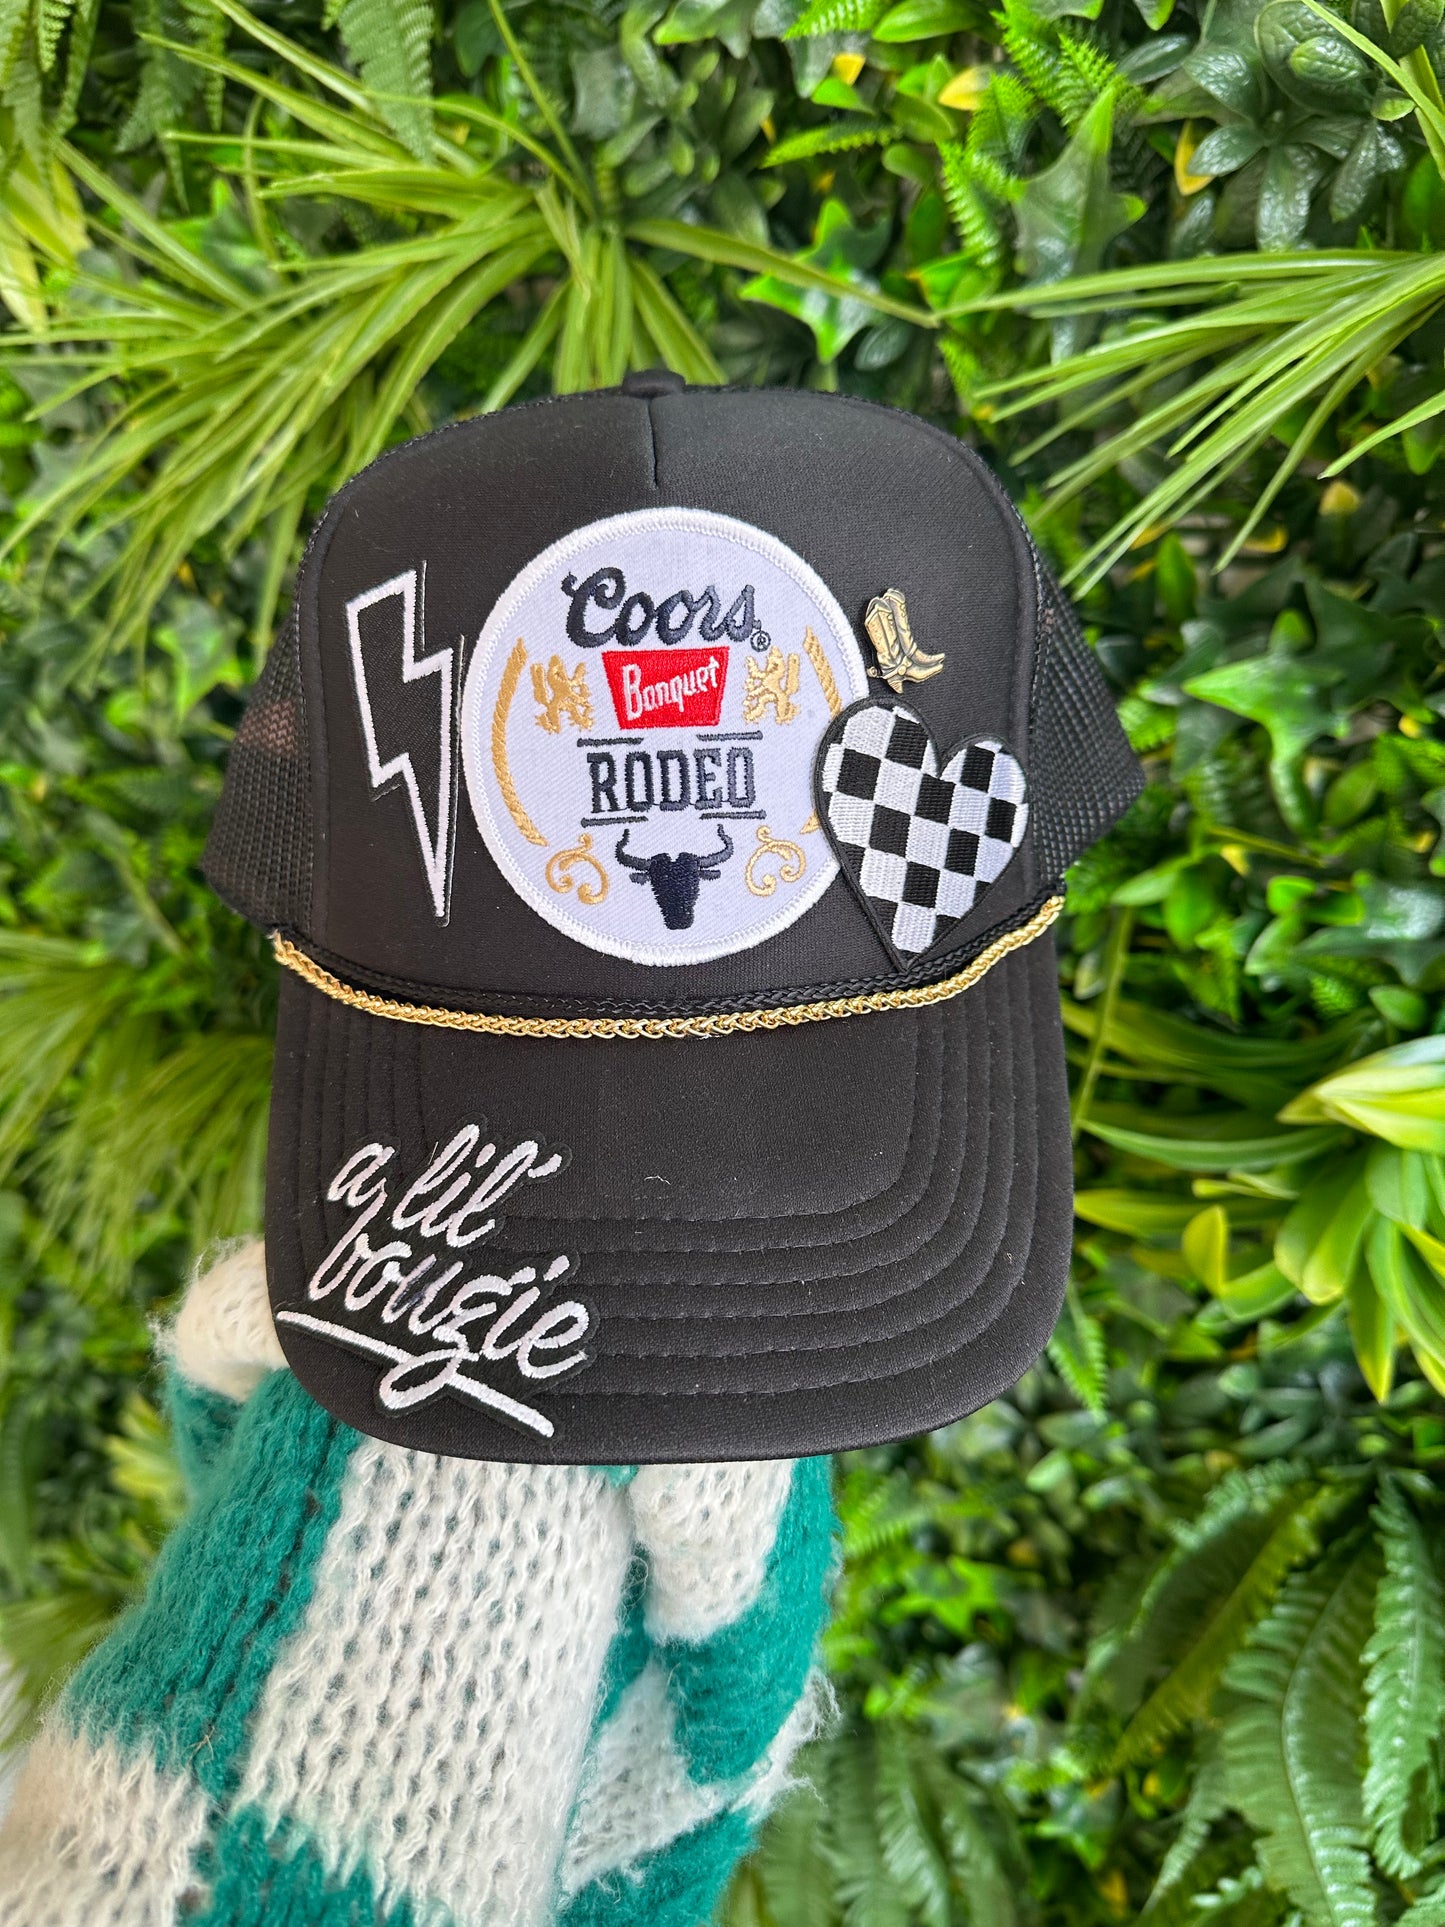 Adult A Lil’ Bougie Coors Banquet Custom Trucker Hat